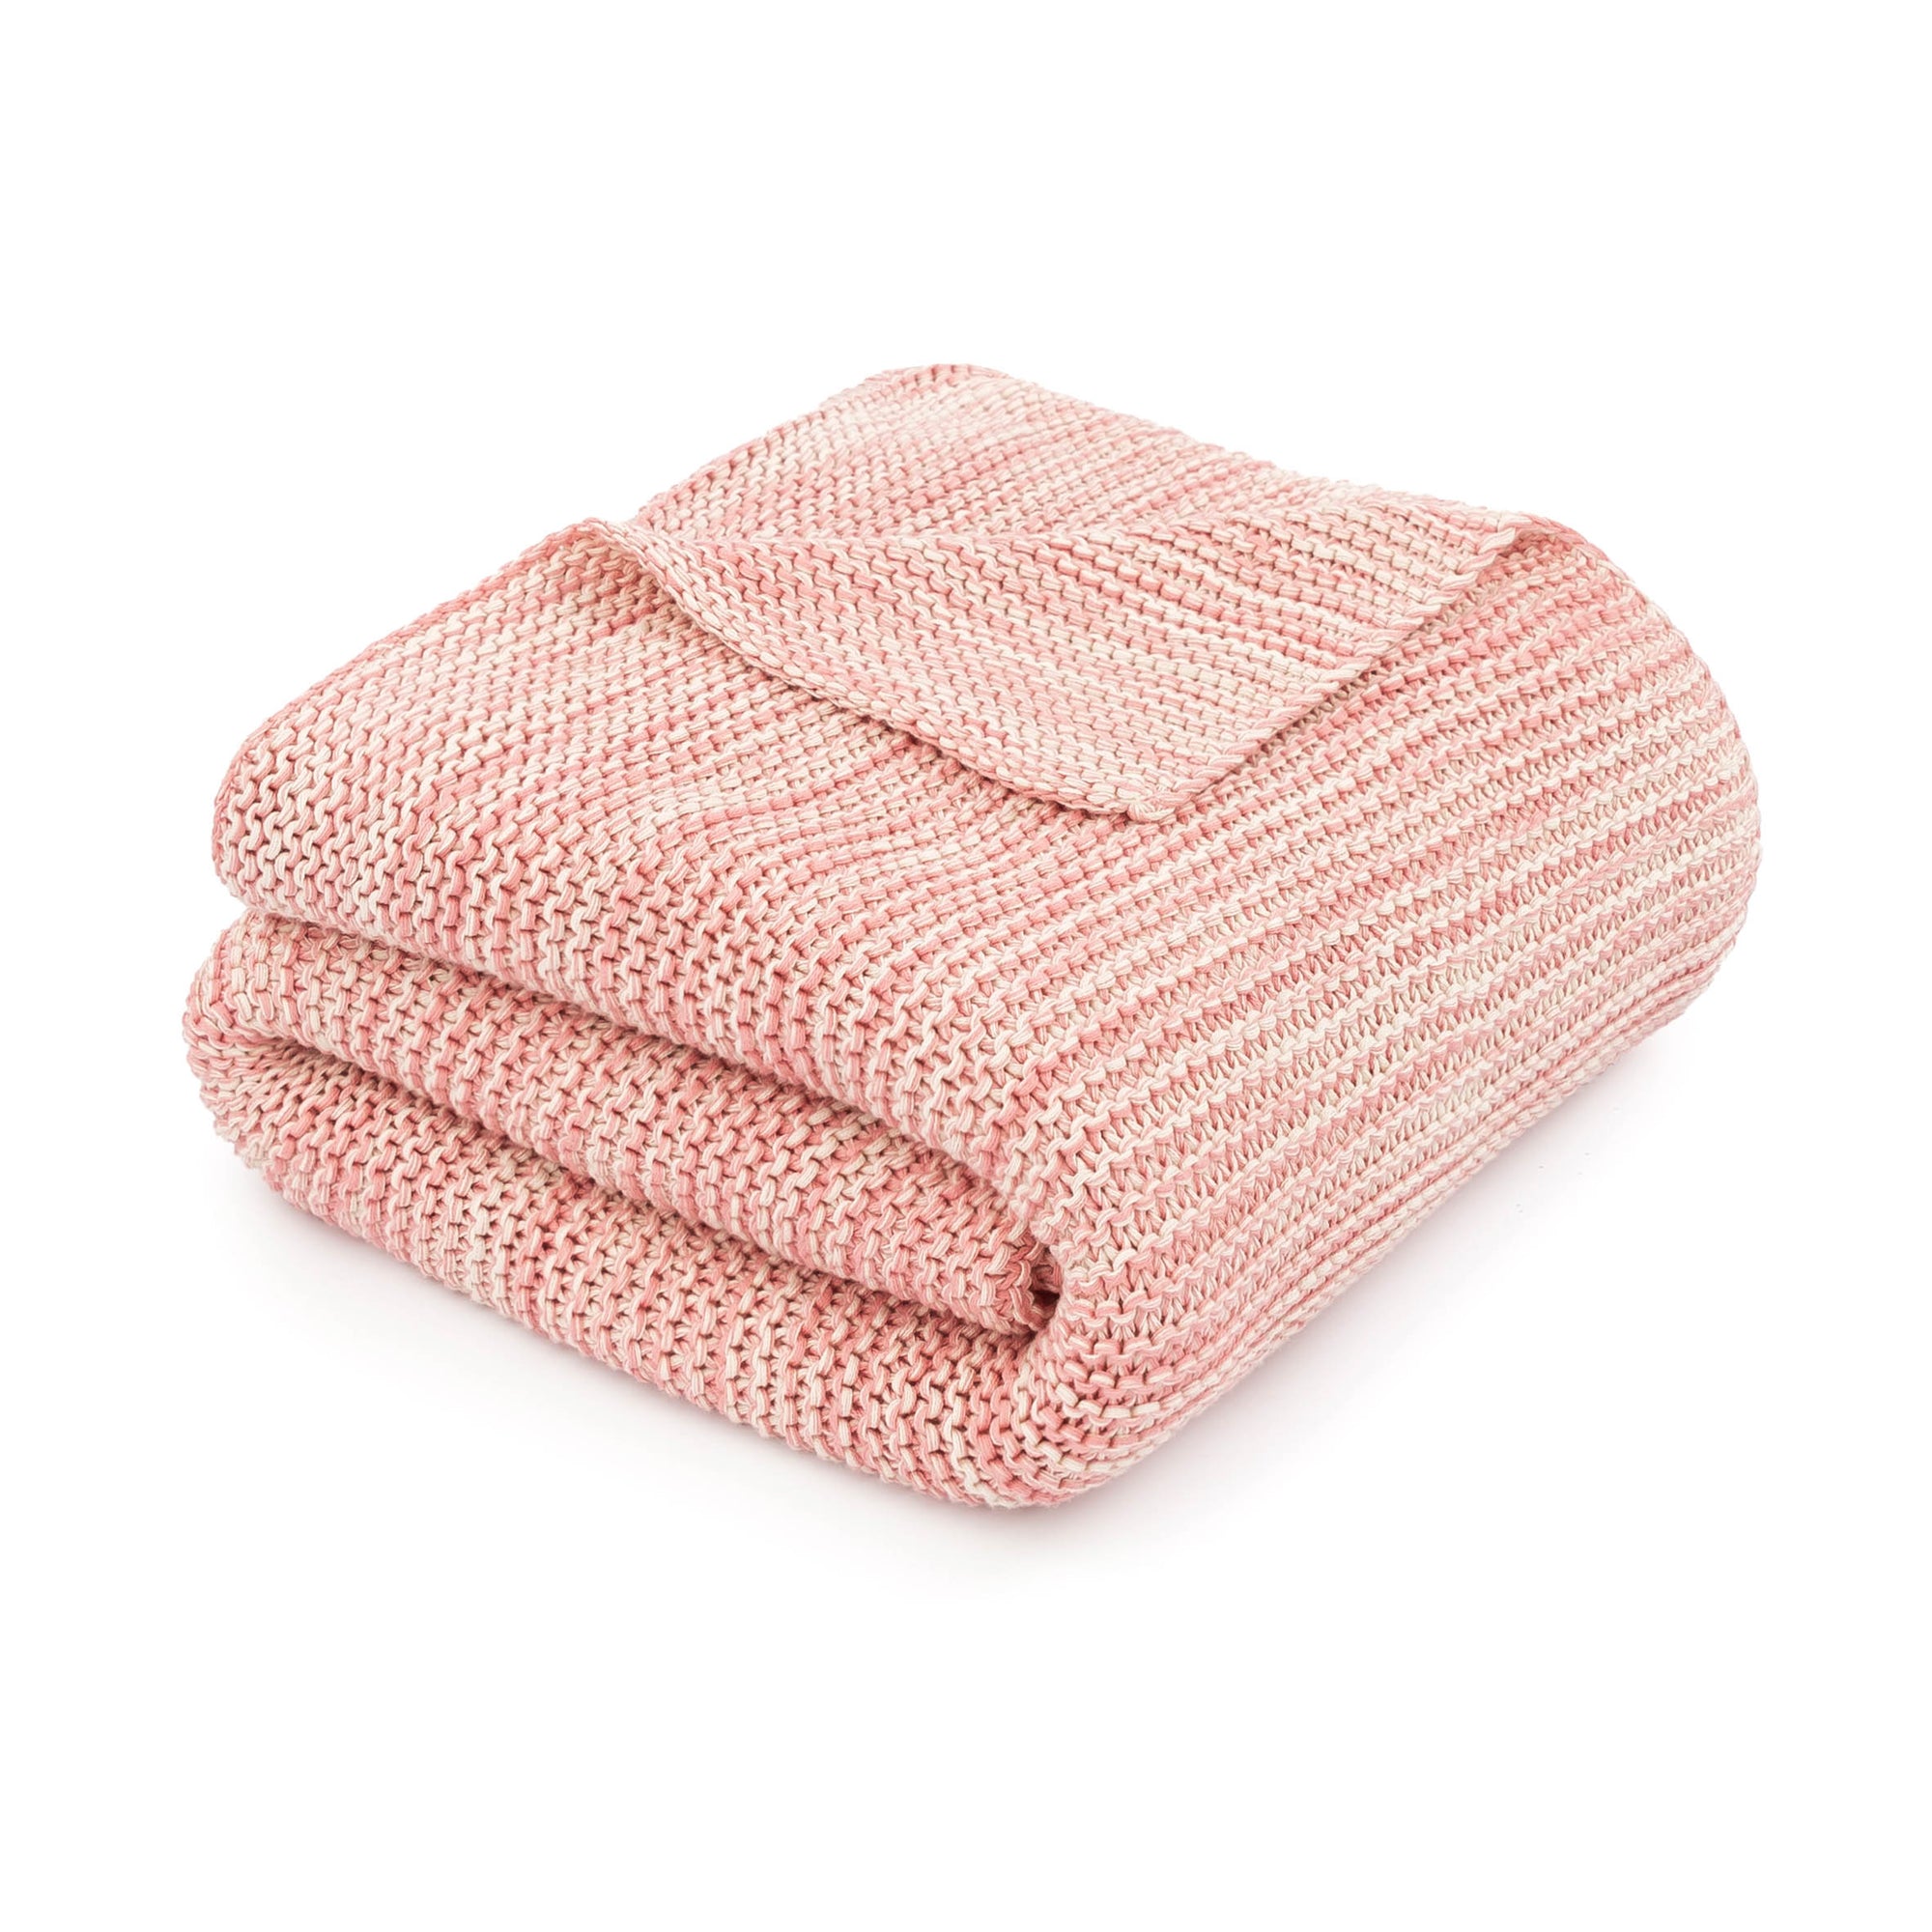 Saturday Park Pink Knitted Throw Blanket